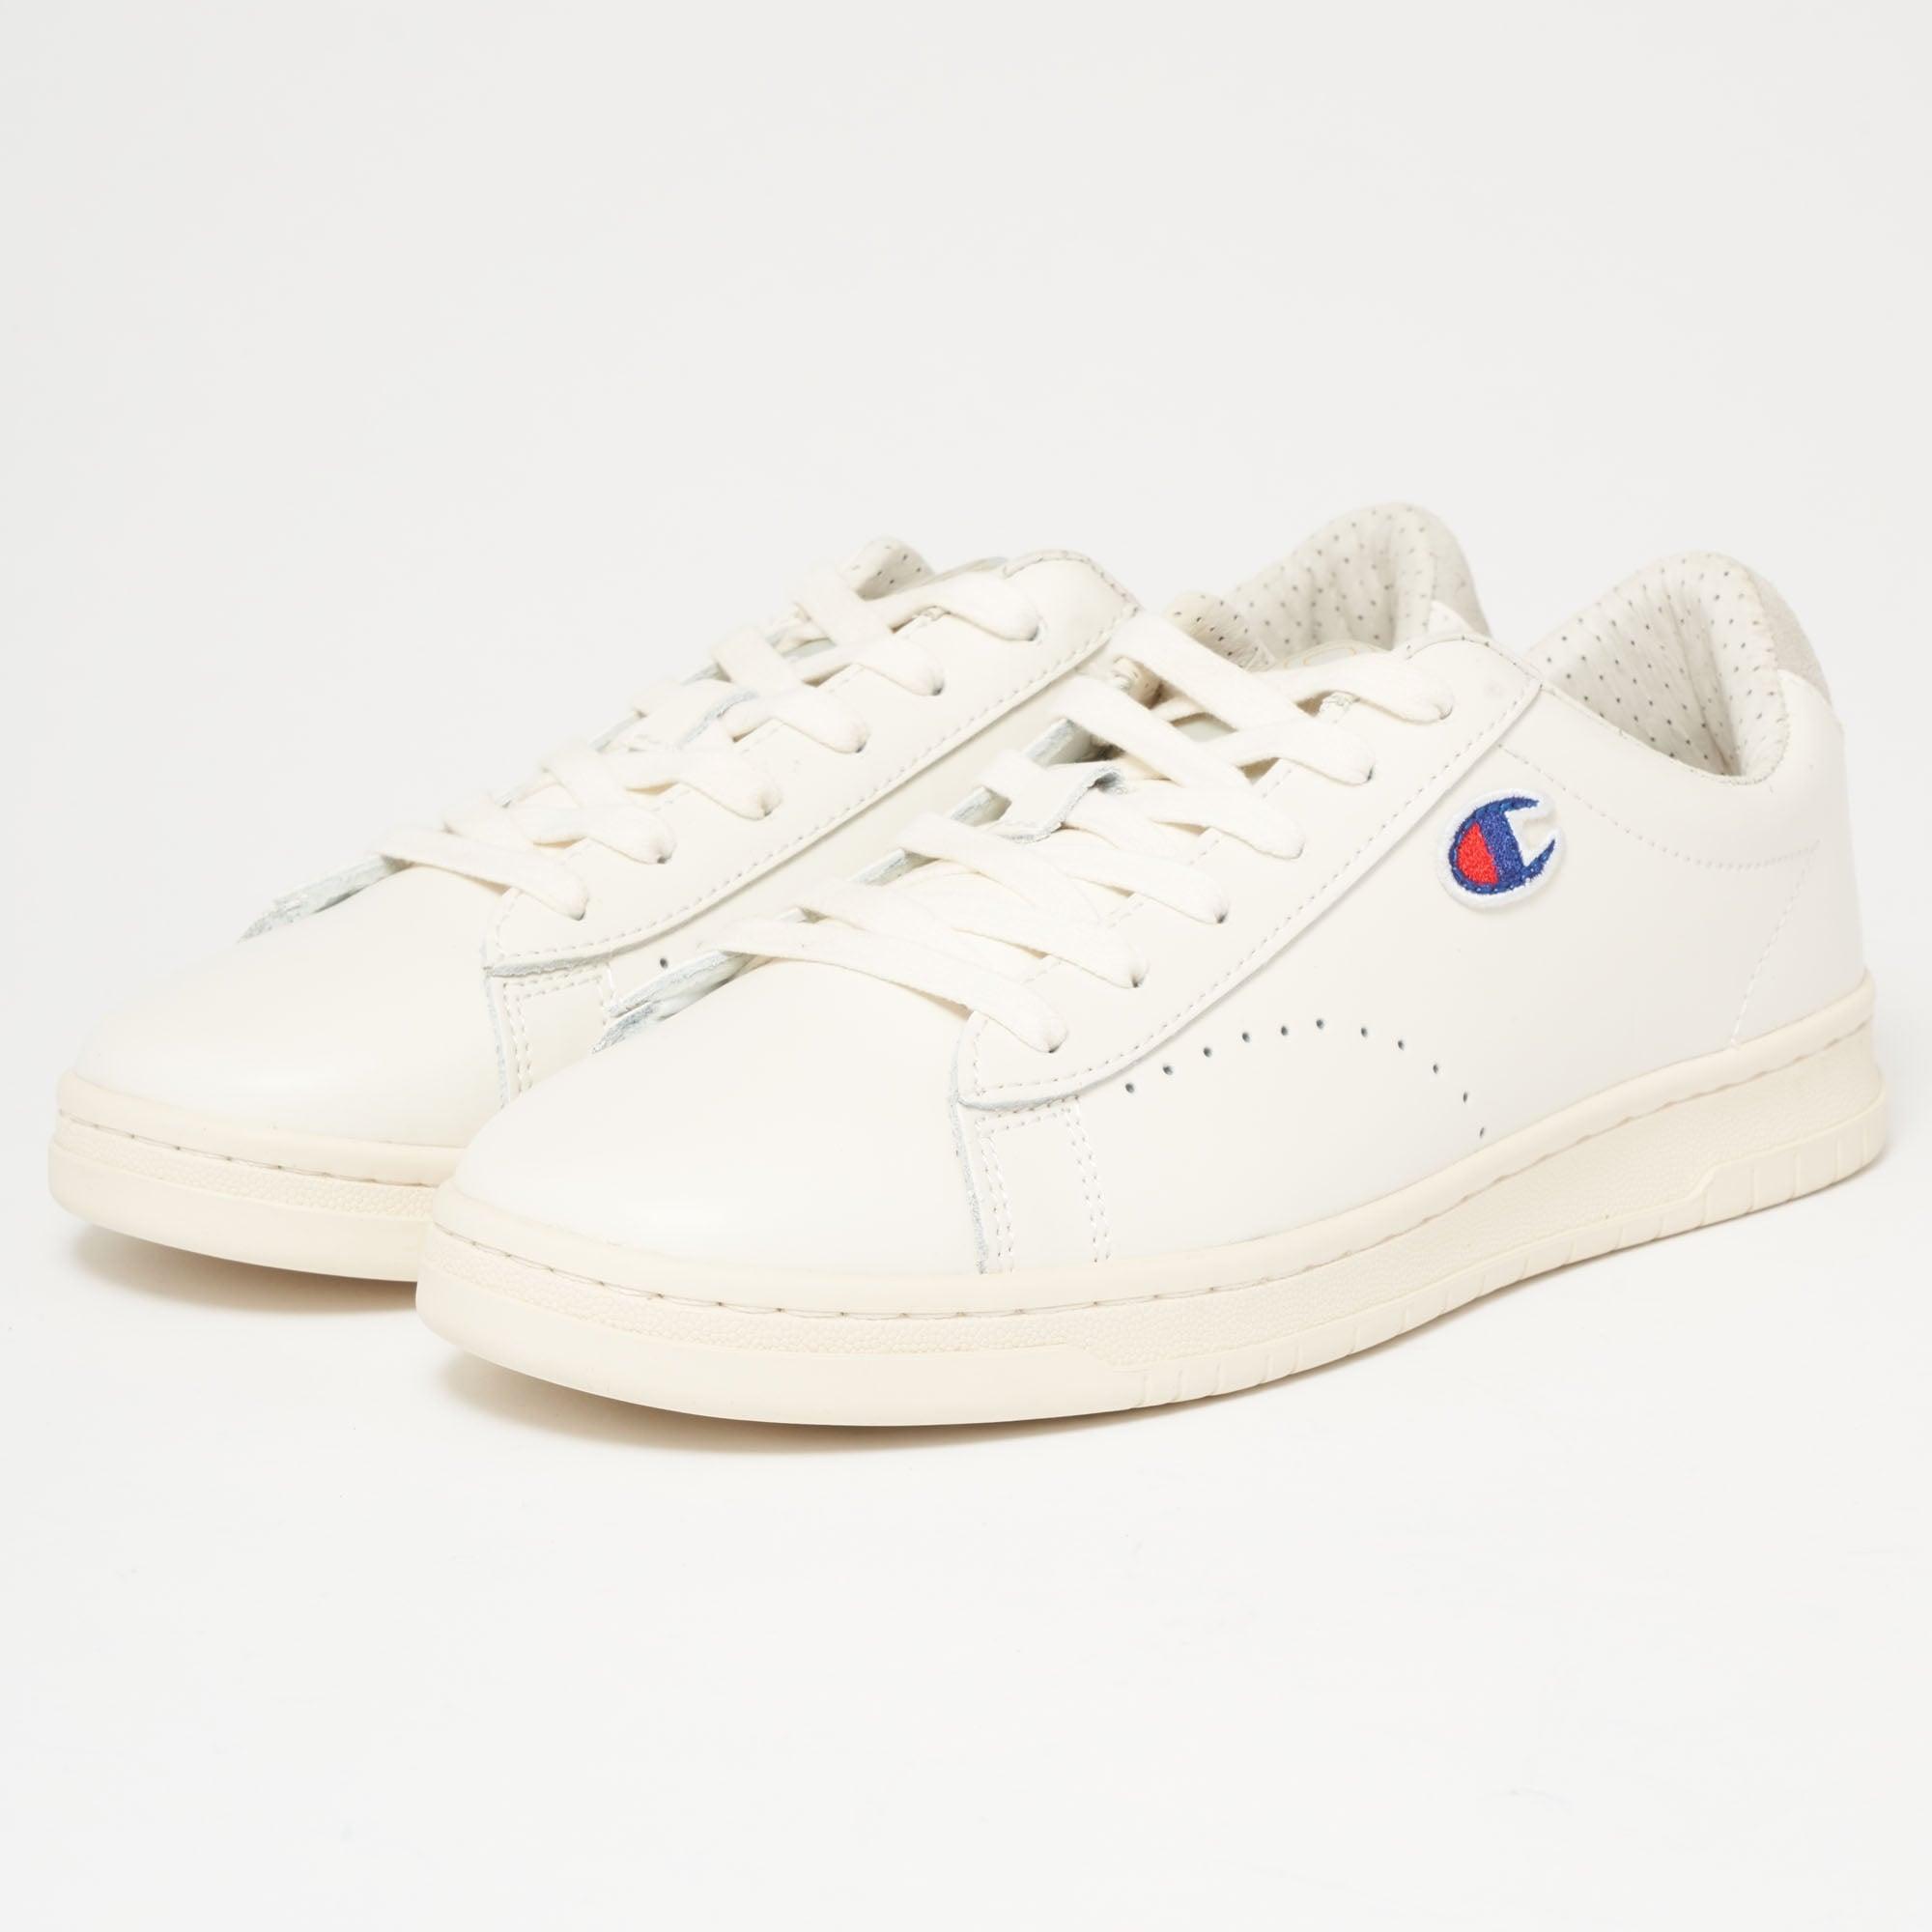 Champion Leather 919 Low Top 'c' Patch Trainers White S20538 for Men - Lyst